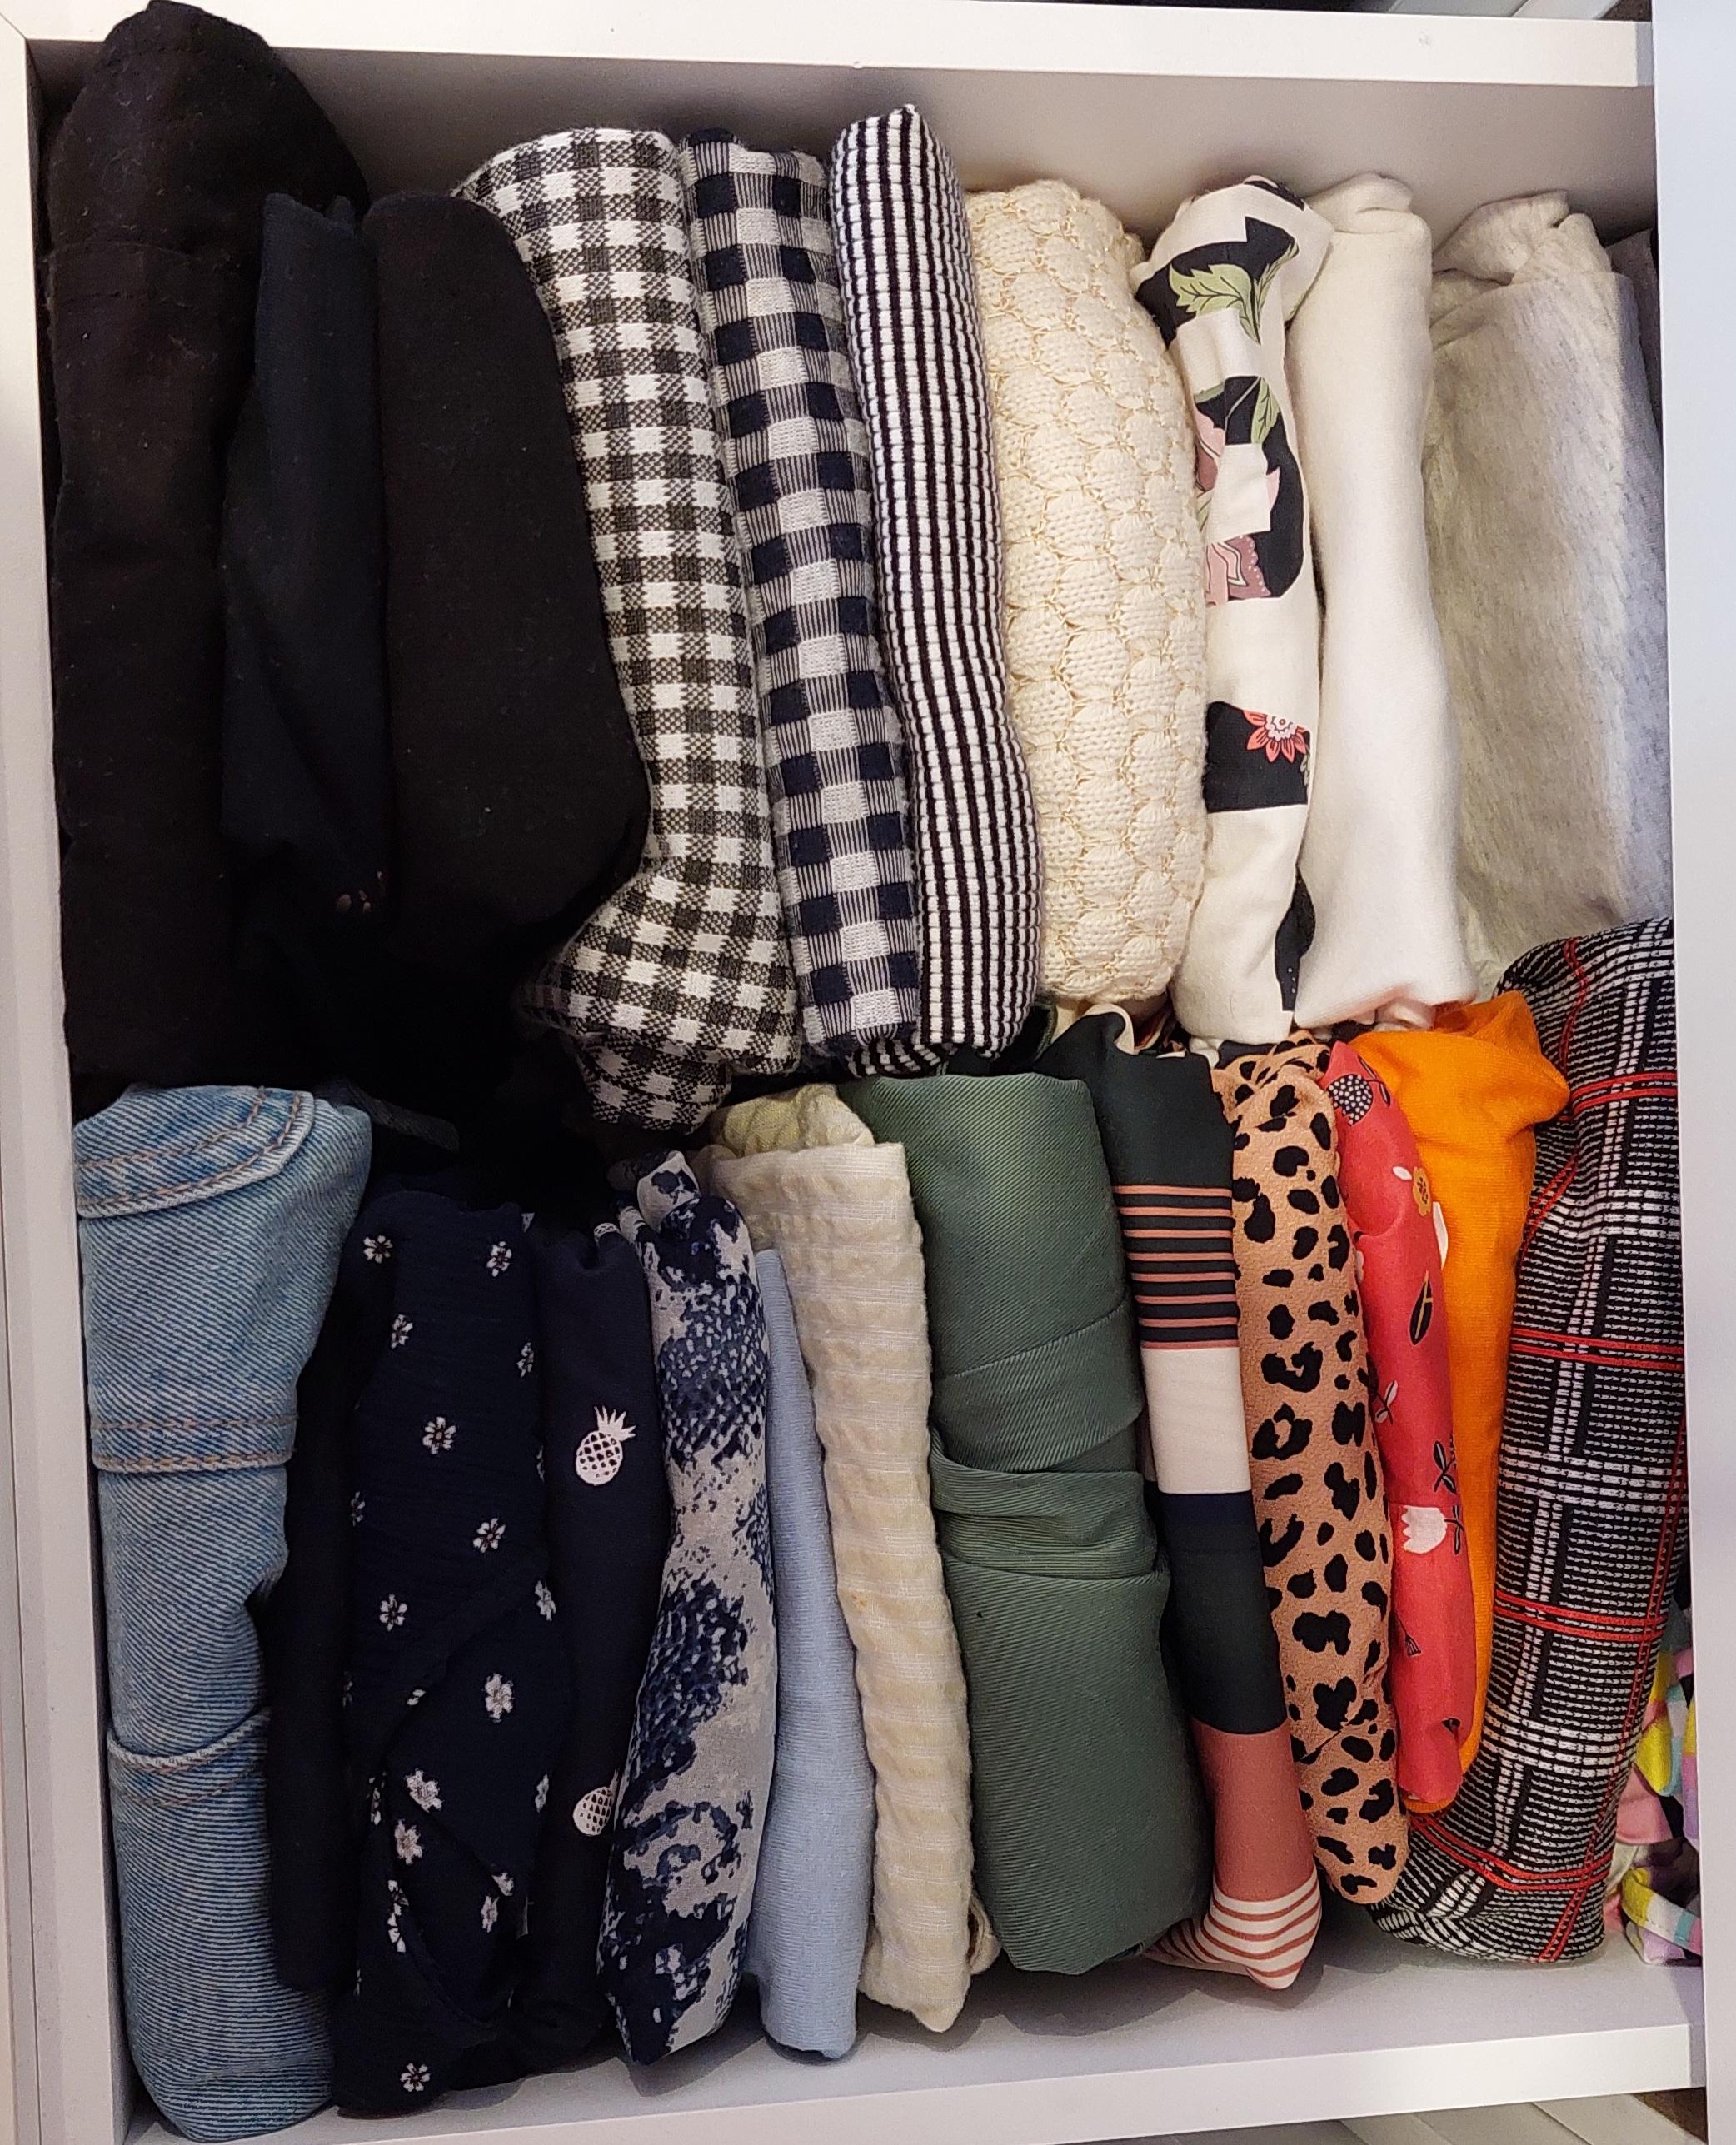 clothes tops and dresses organisation.jpg